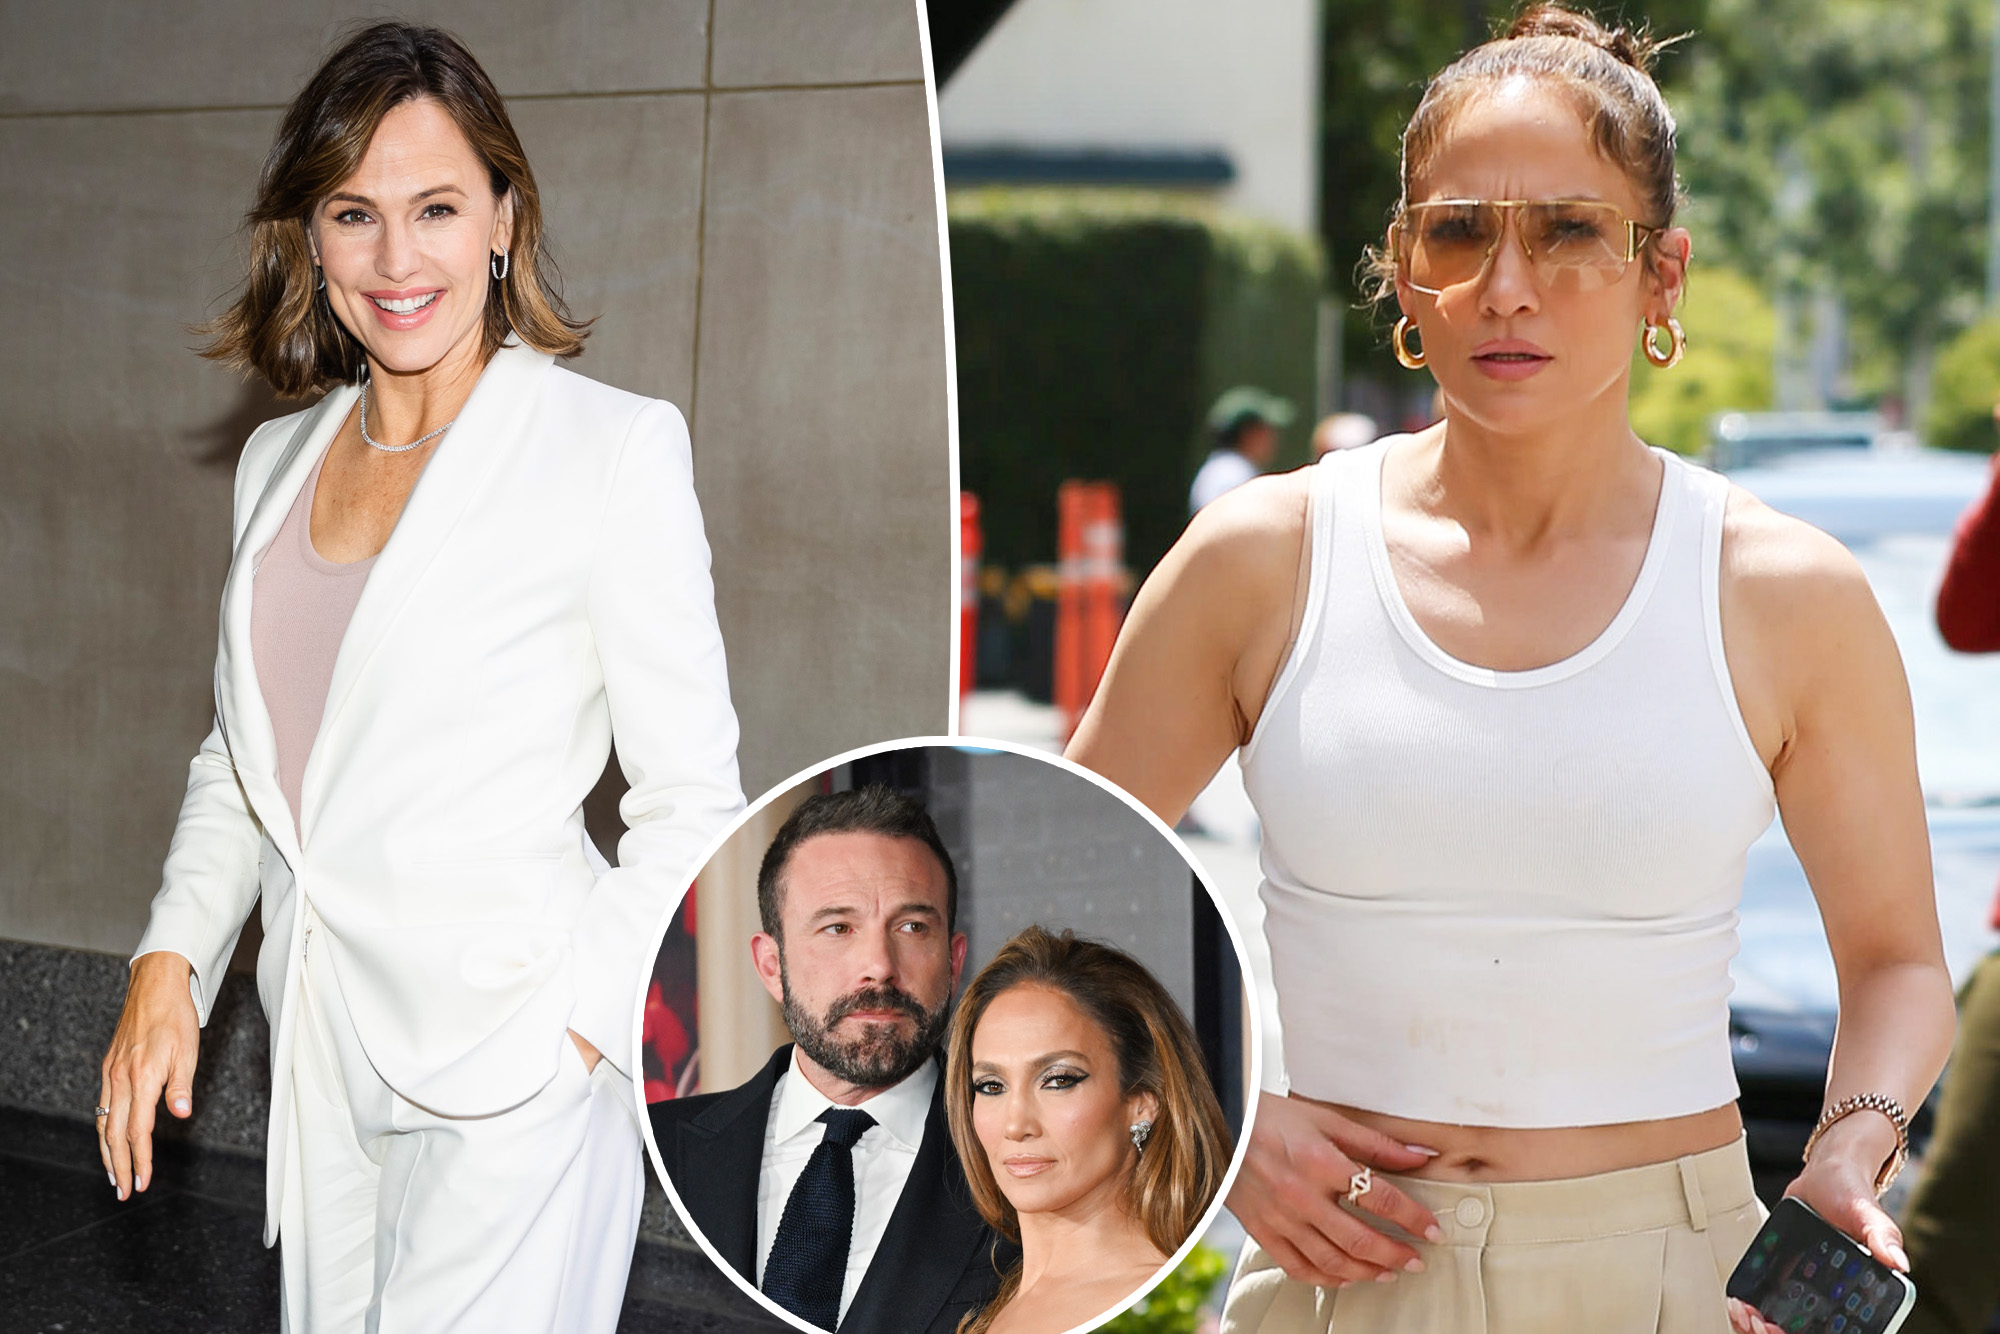 J.Lo and J.Garner: Unlikely Allies Amidst Divorce Drama - What's Really Happening Behind the Scenes?